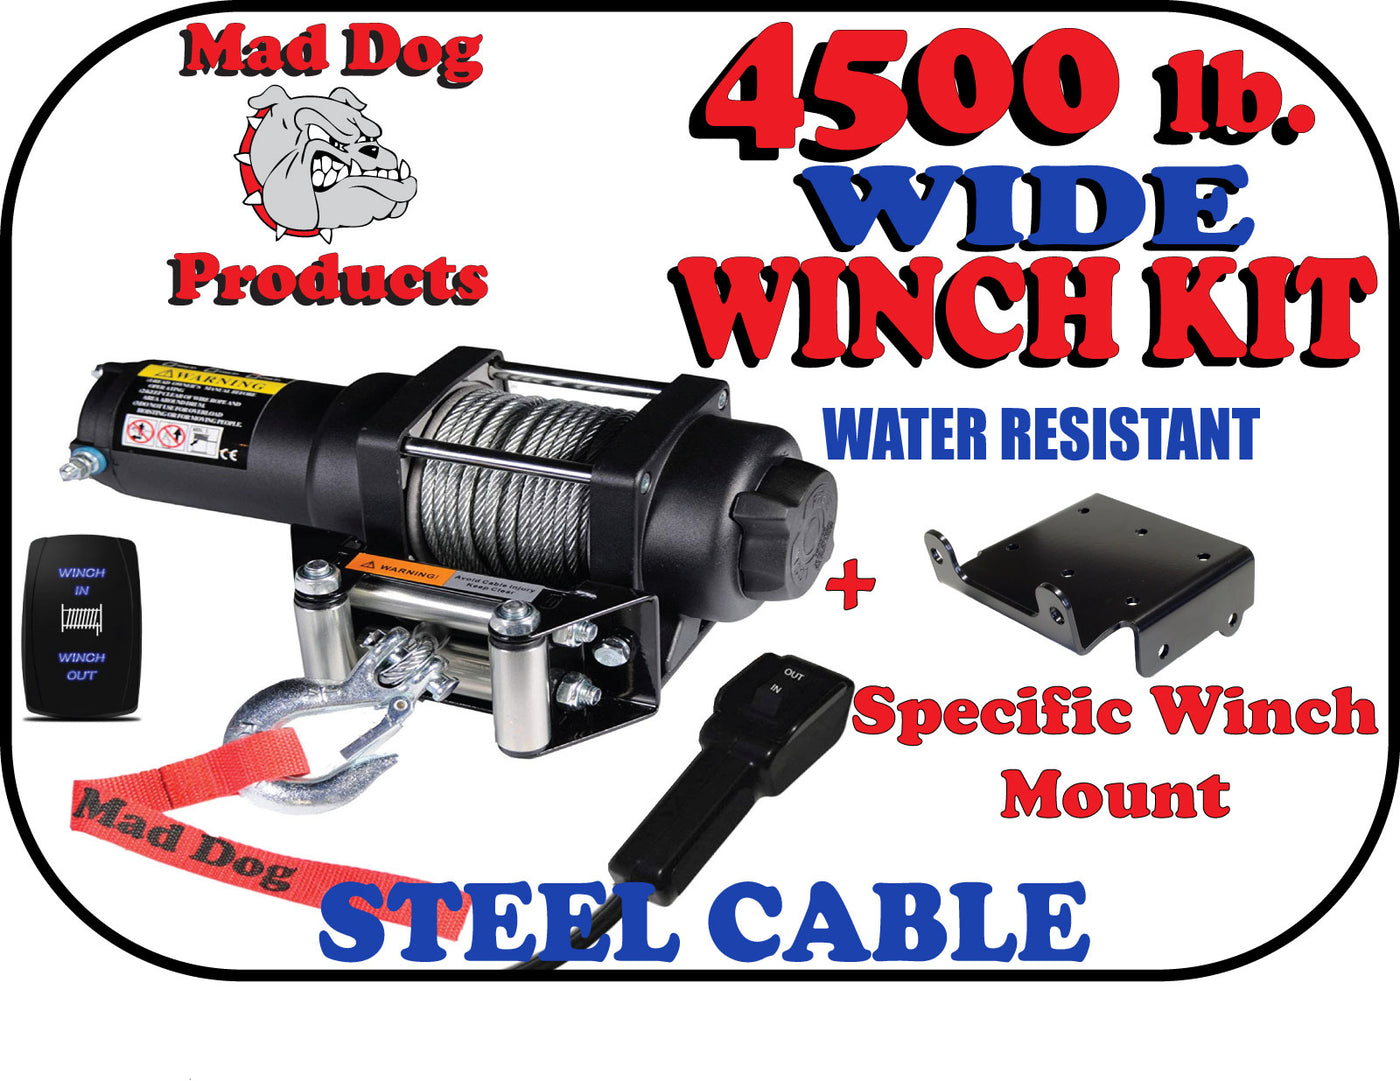 Mad Dog 4500 lb. WIDE Steel Cable ATV/UTV Winch w/ Winch Mount Plate